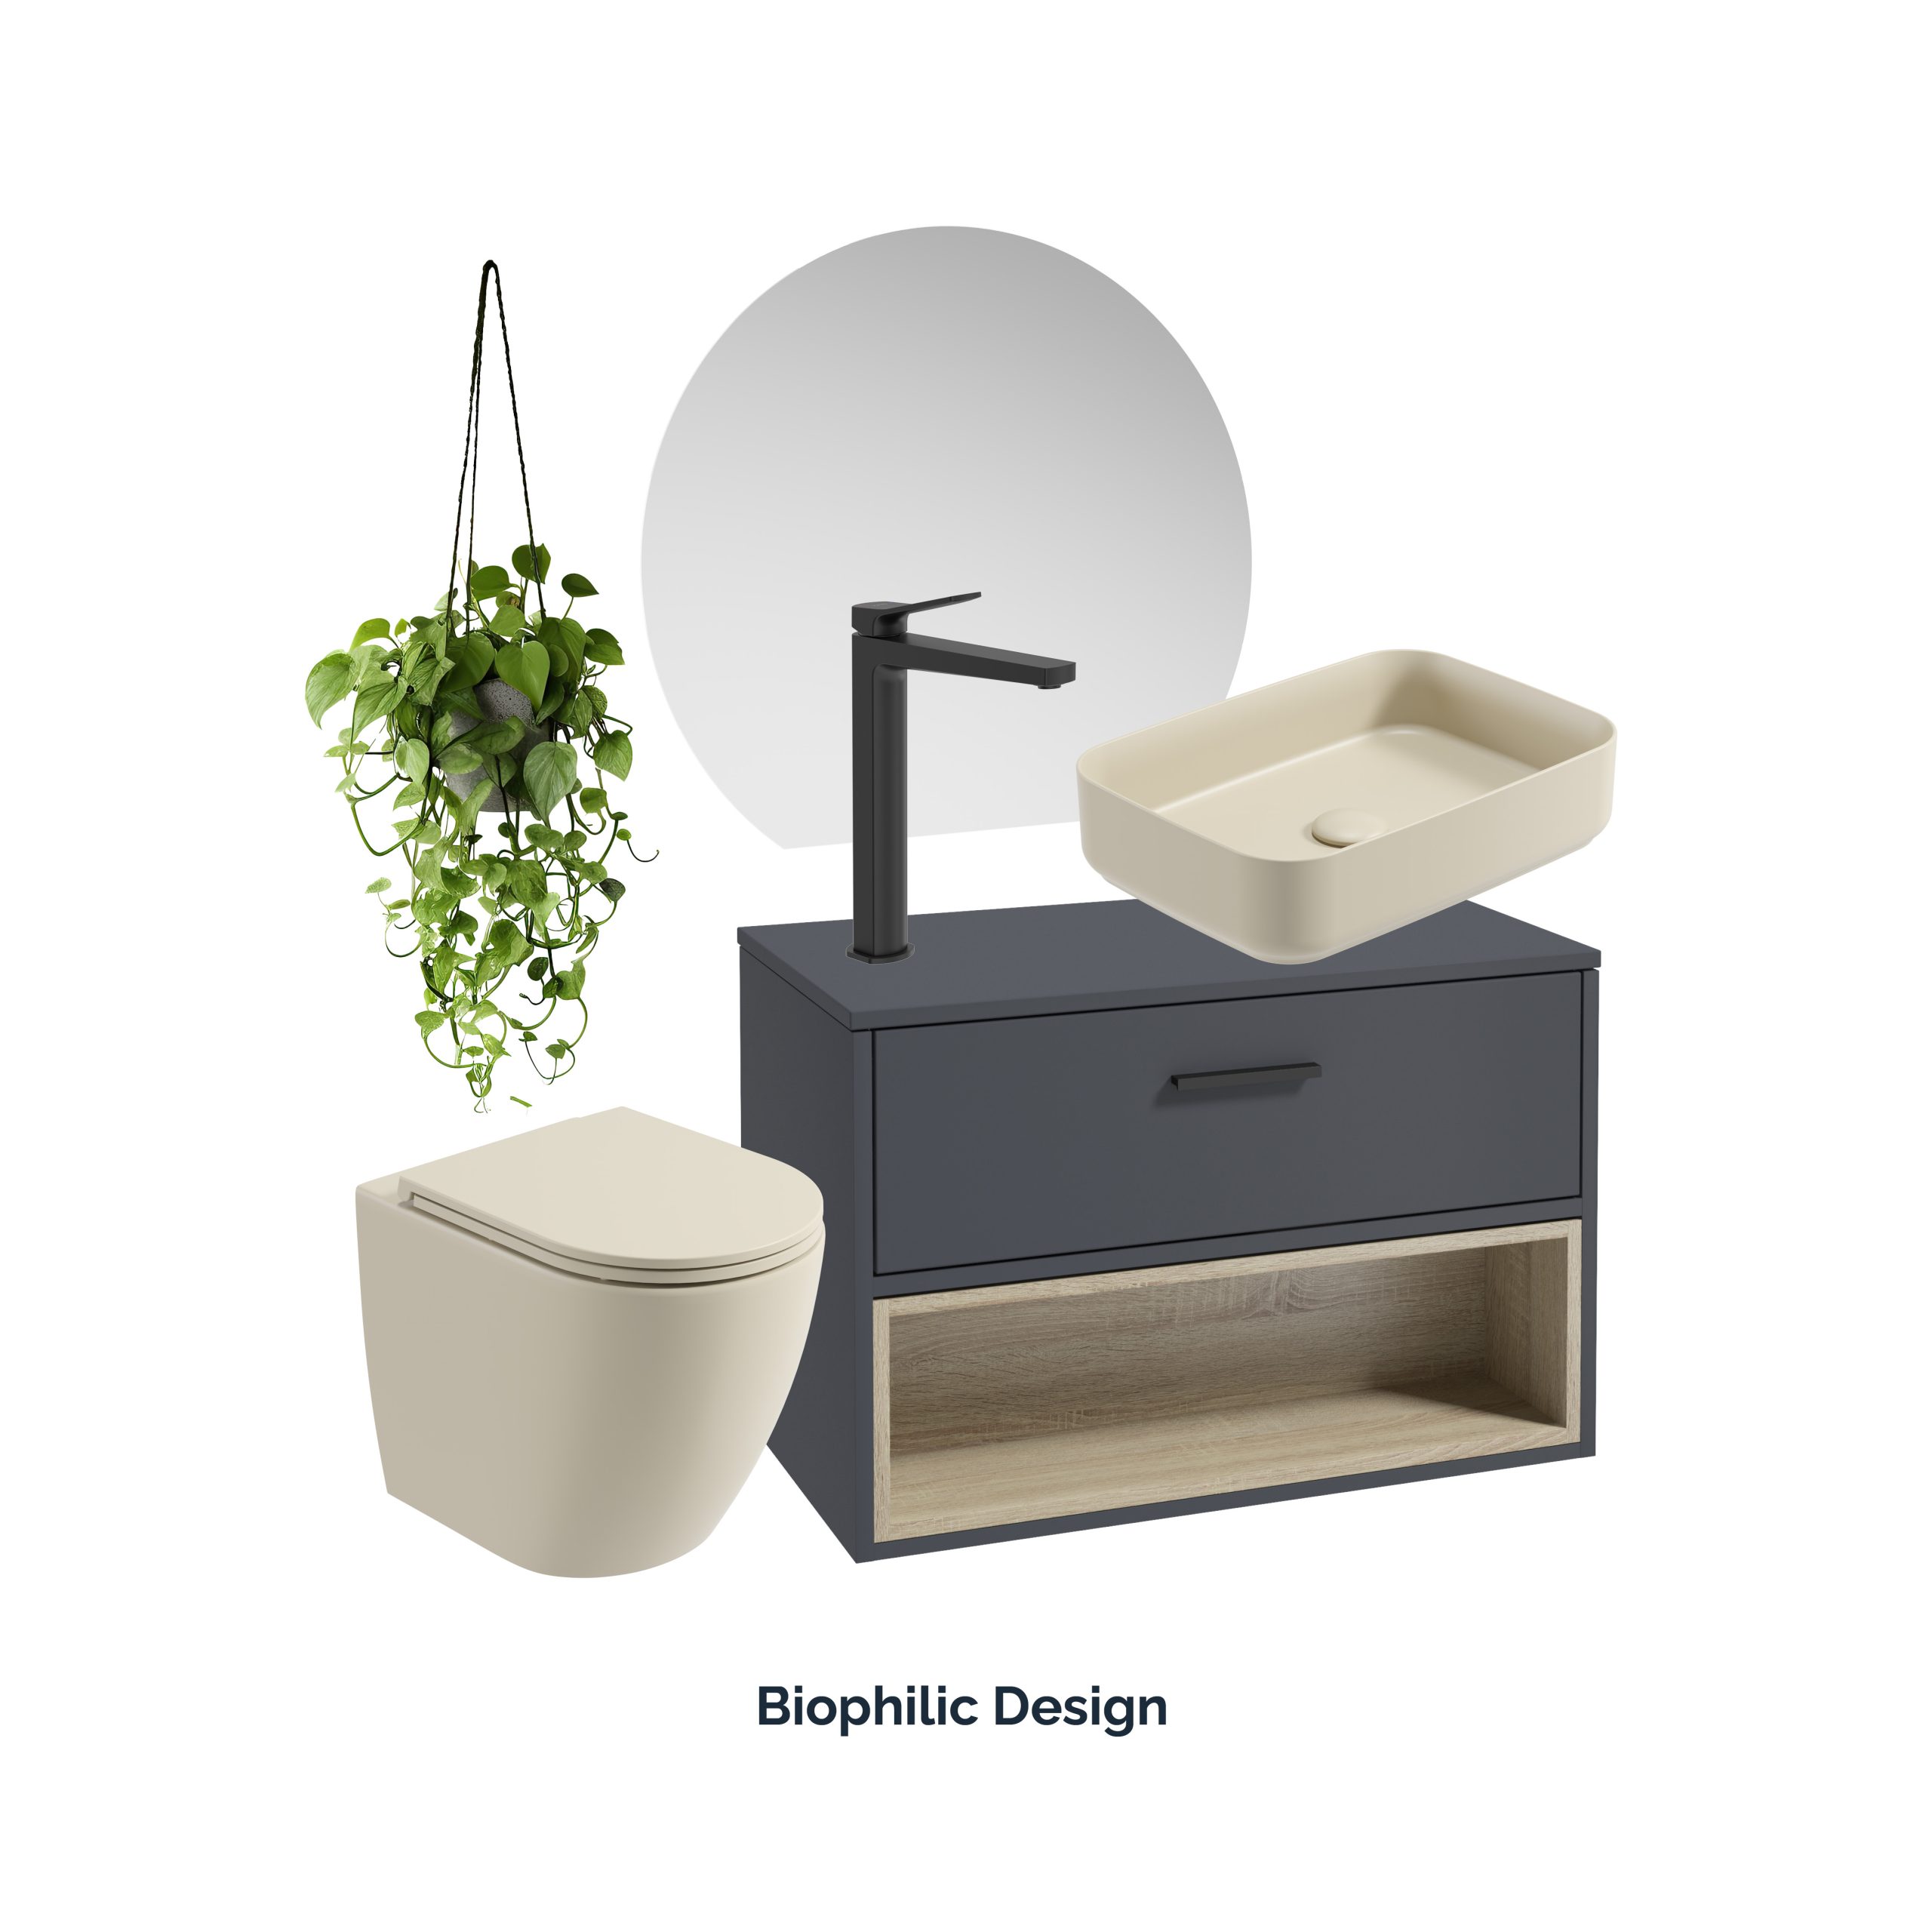 Connect with nature by incorporating plants, natural materials, light, and organic shapes.